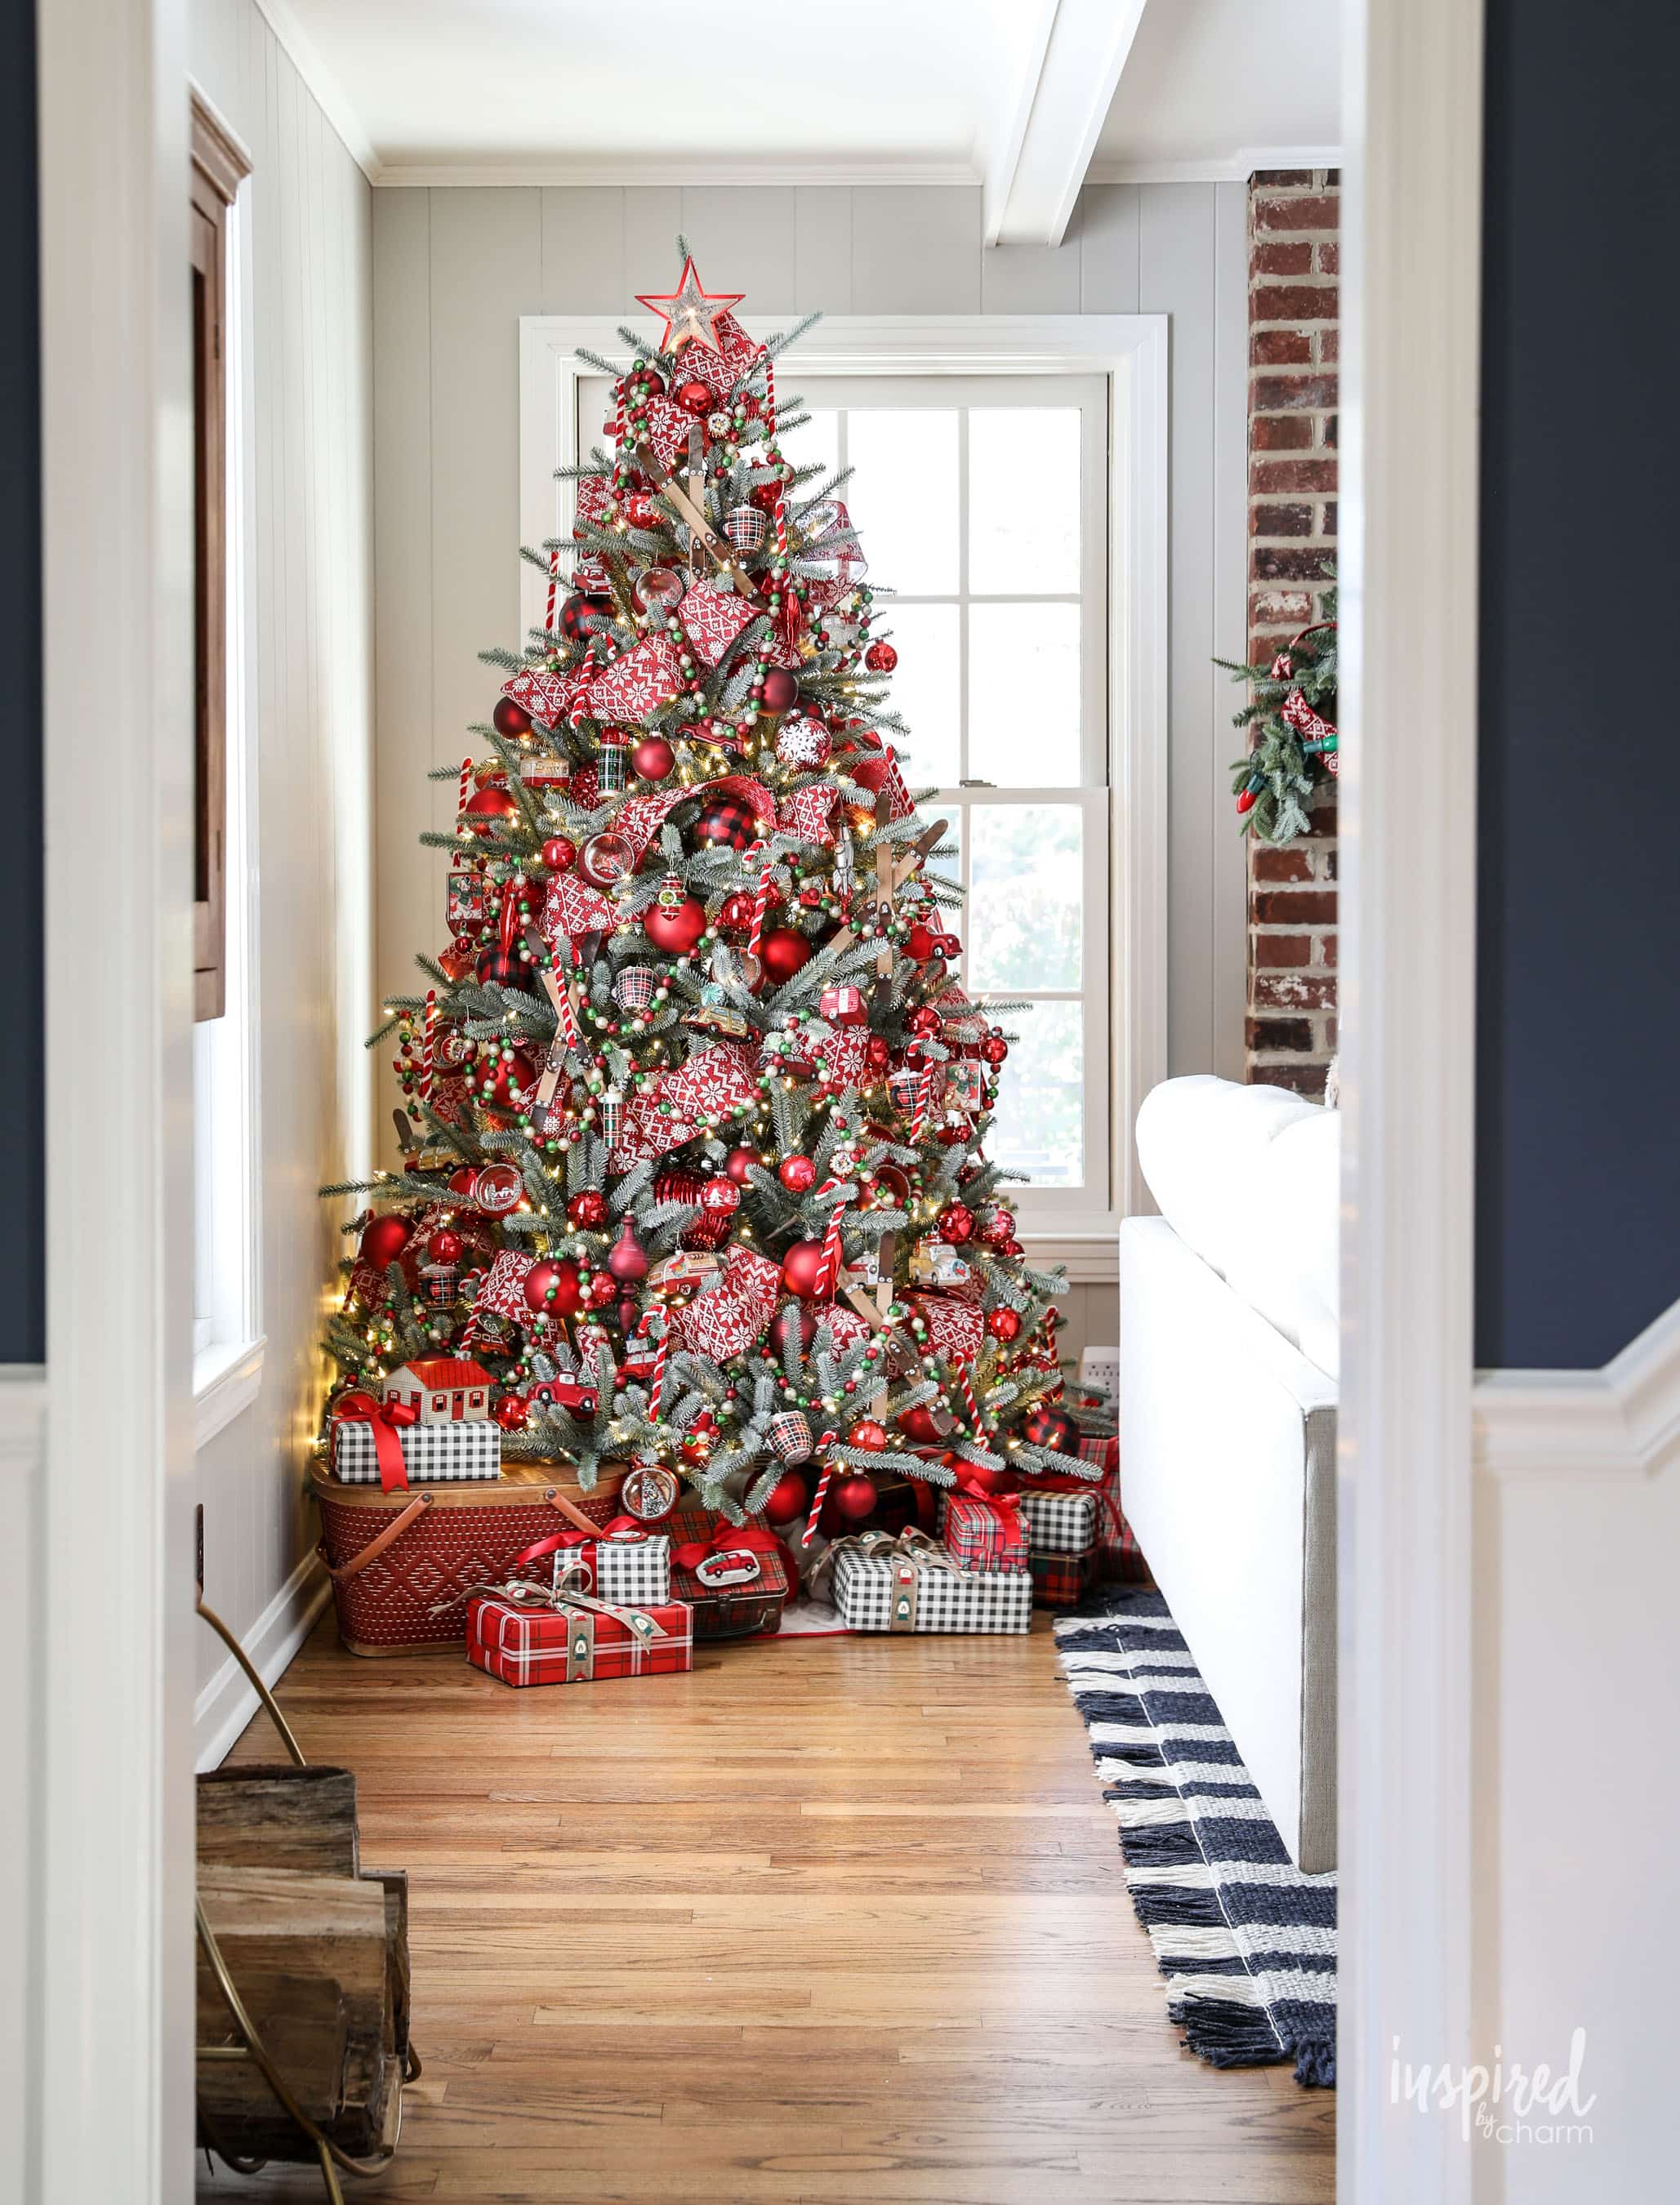 Whimsical Tree with Colorful Pom Poms - Balsam Hill Blog